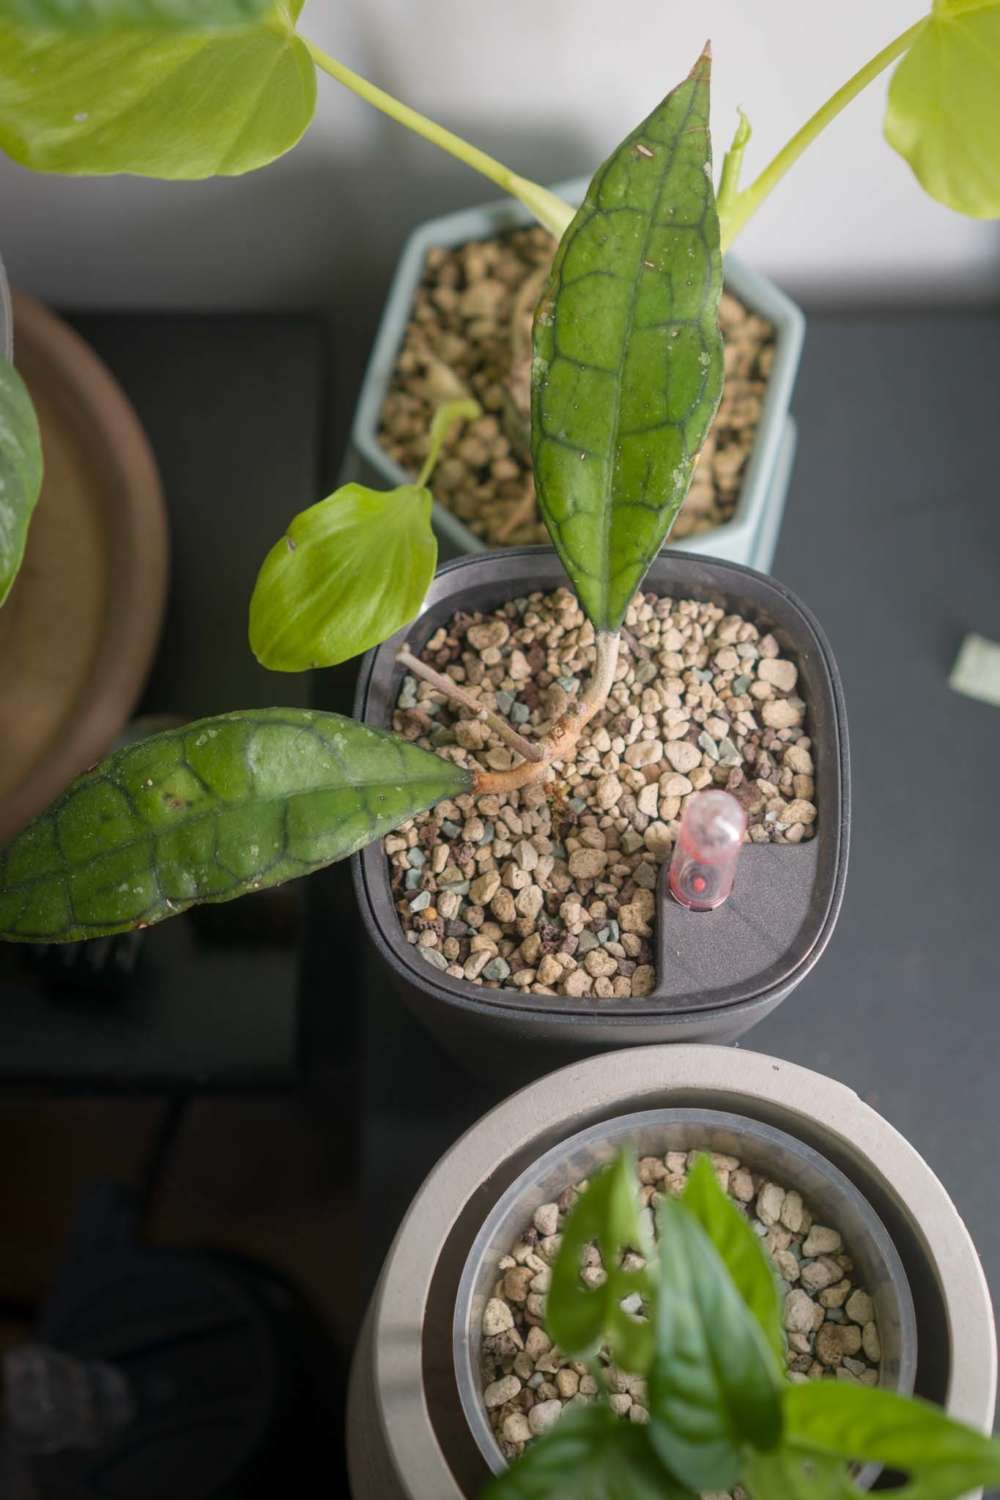 How to transition your plants to Lechuza Pon